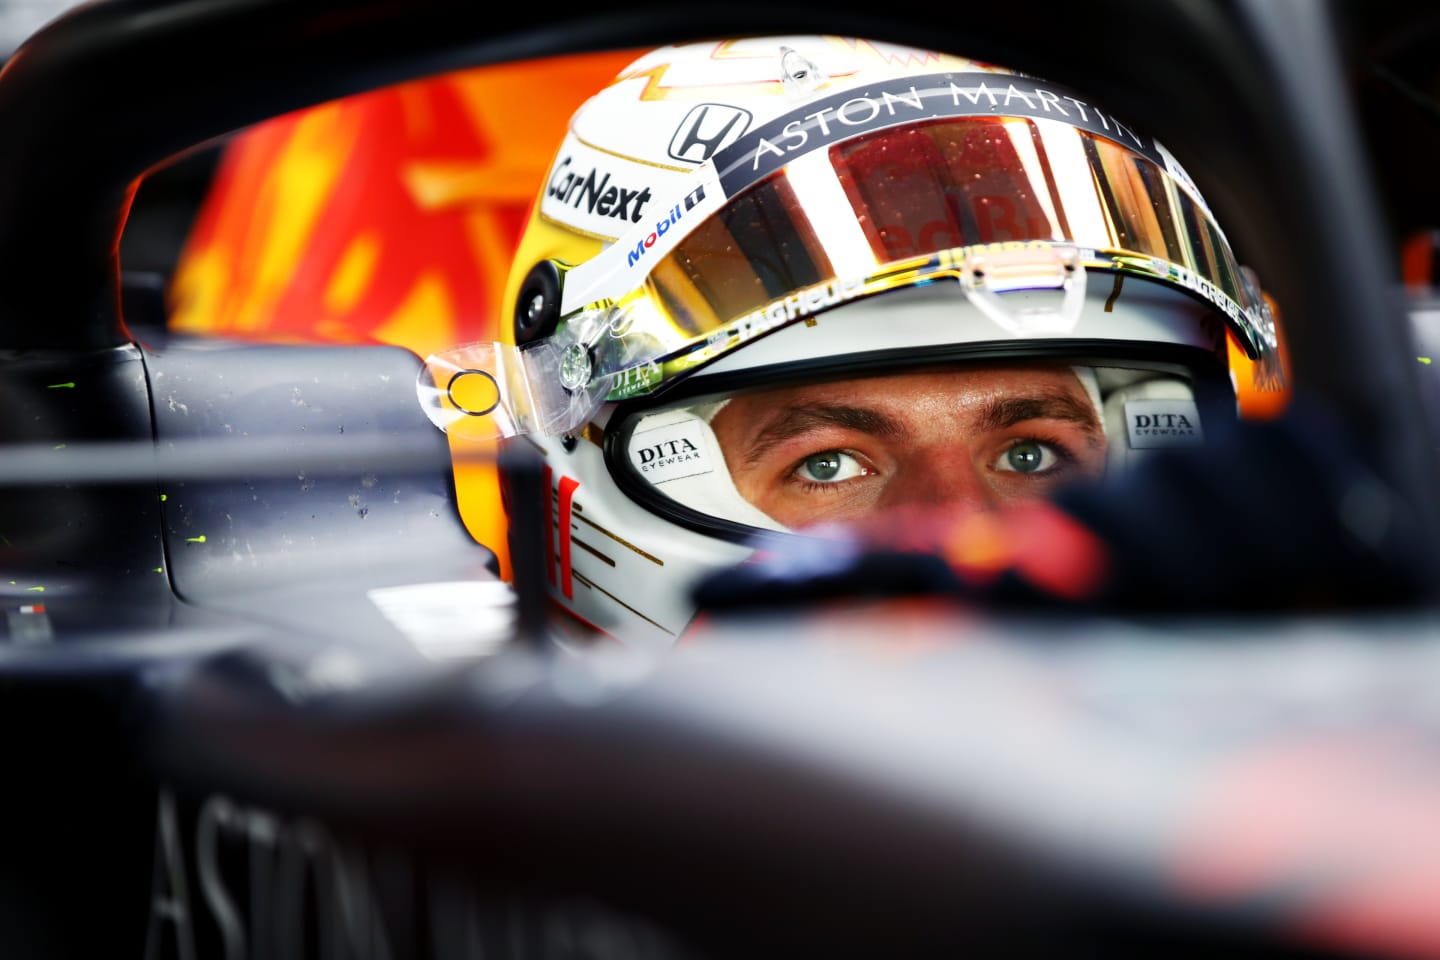 ABU DHABI, UNITED ARAB EMIRATES - DECEMBER 11: Max Verstappen of Netherlands and Red Bull Racing